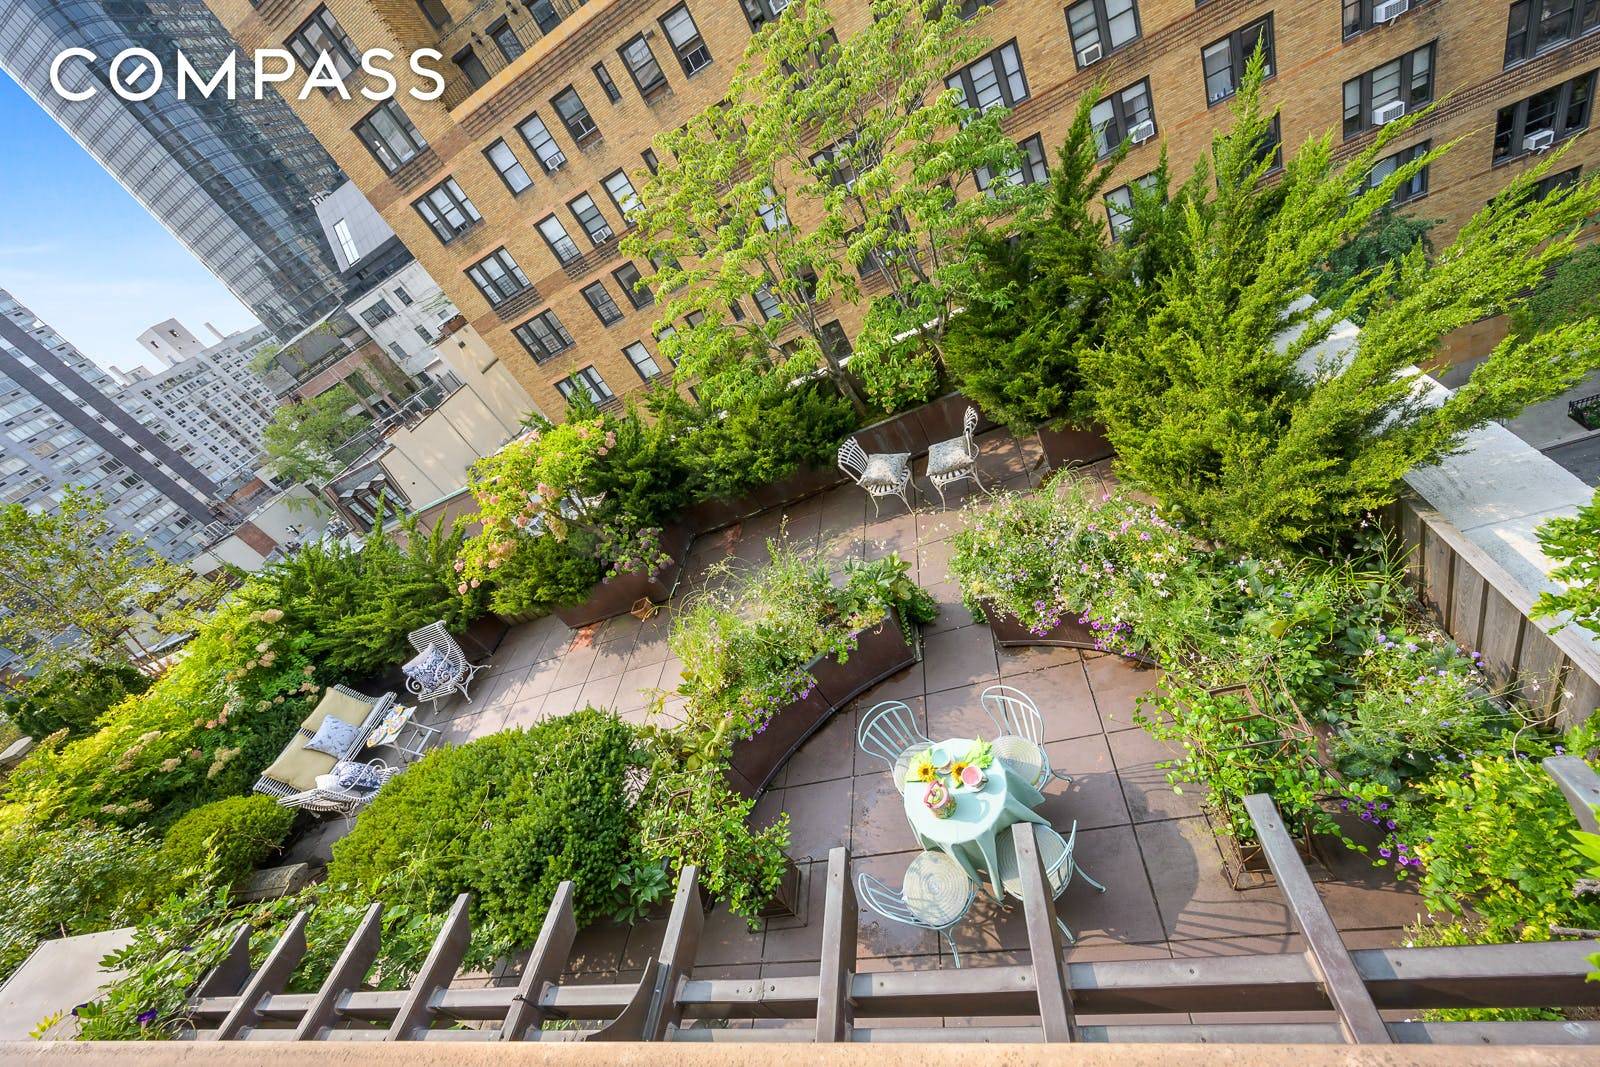 Alice In Wonderland garden terraces meets a Parisian 3 Bedroom Duplex Penthouse A has been architecturally redesigned and renovated to create a feeling that one is living in a townhome.